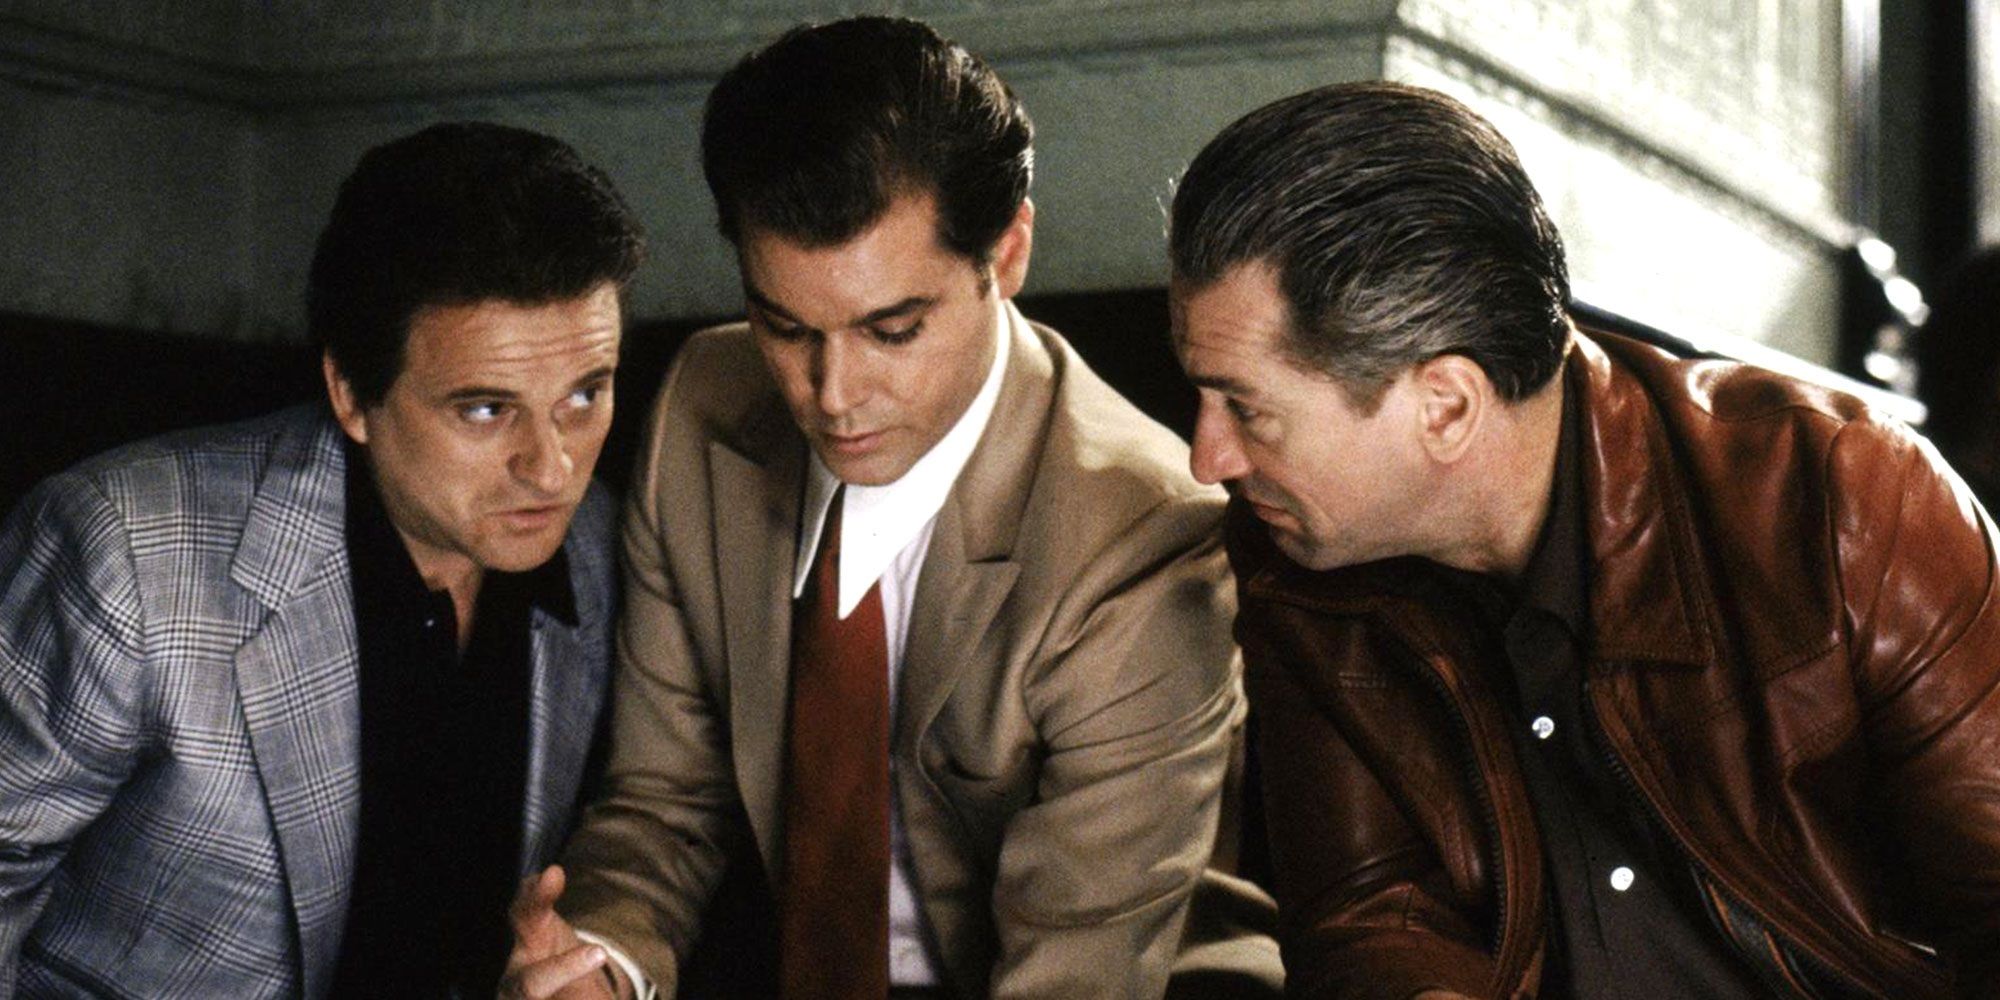 Henry Jimmy and Tommy in Goodfellas